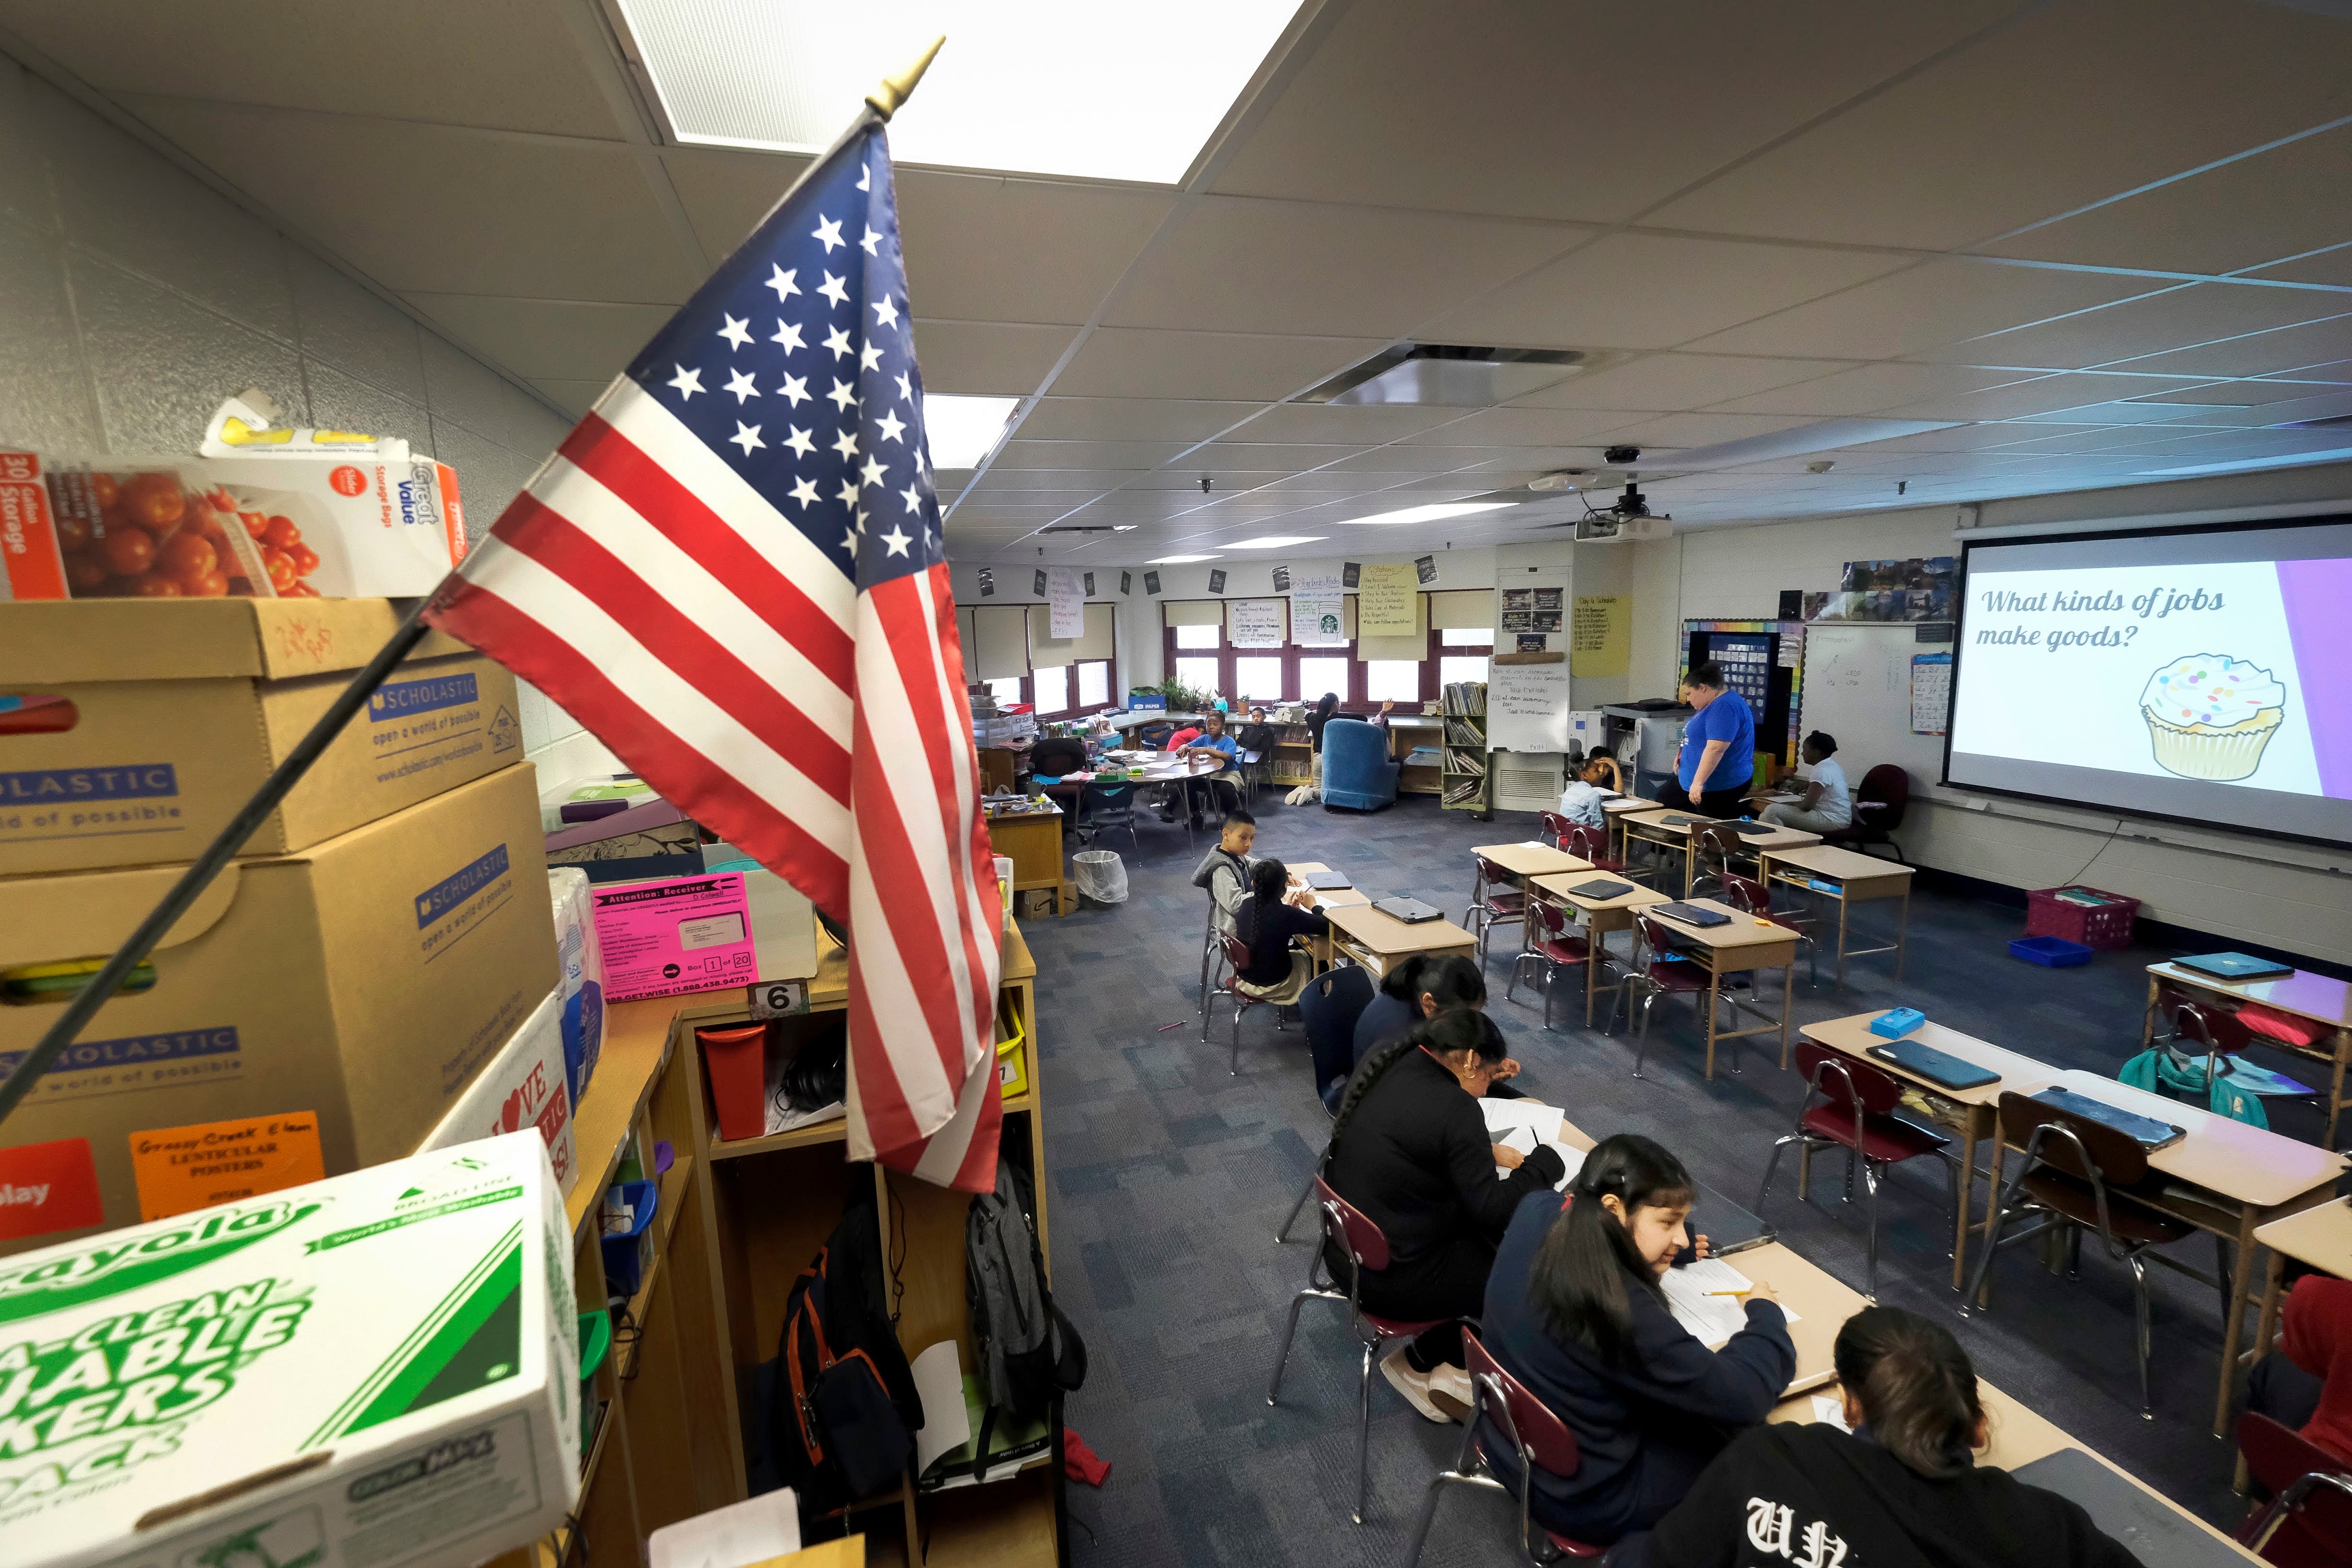 An American flag hangs on a wall an elementary classroom with a few students sitting in a row.